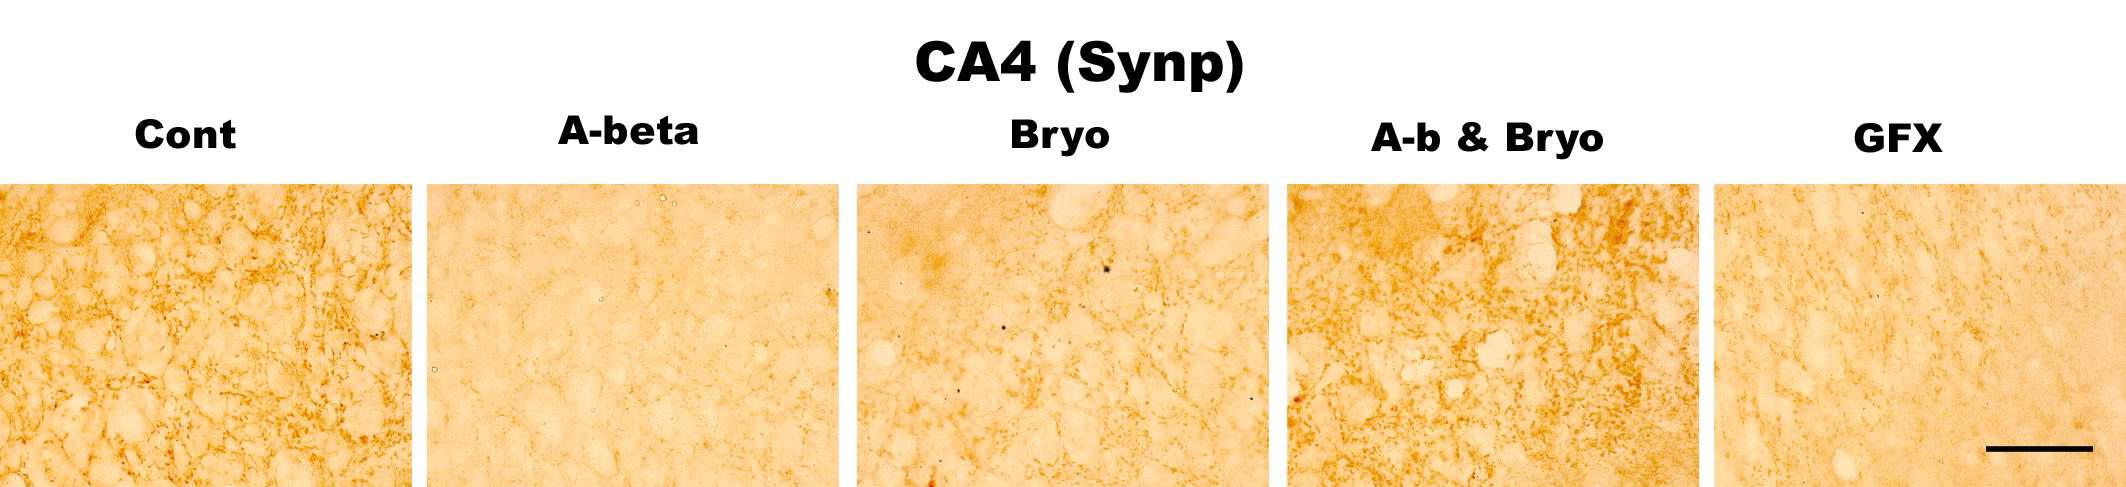 Effects of Bryostatin-1 on synapses in CA4 pyramidal neurons of hippocampus in rat. Bryostatin-1 significantly prevented reduction of synaptophysin (presynaptic protein) in CA4 of rat infused with amyloid beta. PKC inhibitor GFX 109203 reduces synaptophysin in CA4. Intracerebro-ventricular infusion of Aβ and Bryostatin-1 was for four weeks using a micro-osmotic pump. PKC inhibitor GFX 109203 was administrated with I.c.v. injection. Immuno- histochemistry (anti-CD11b) (scale bar, 50μm)(40Χ magnification)